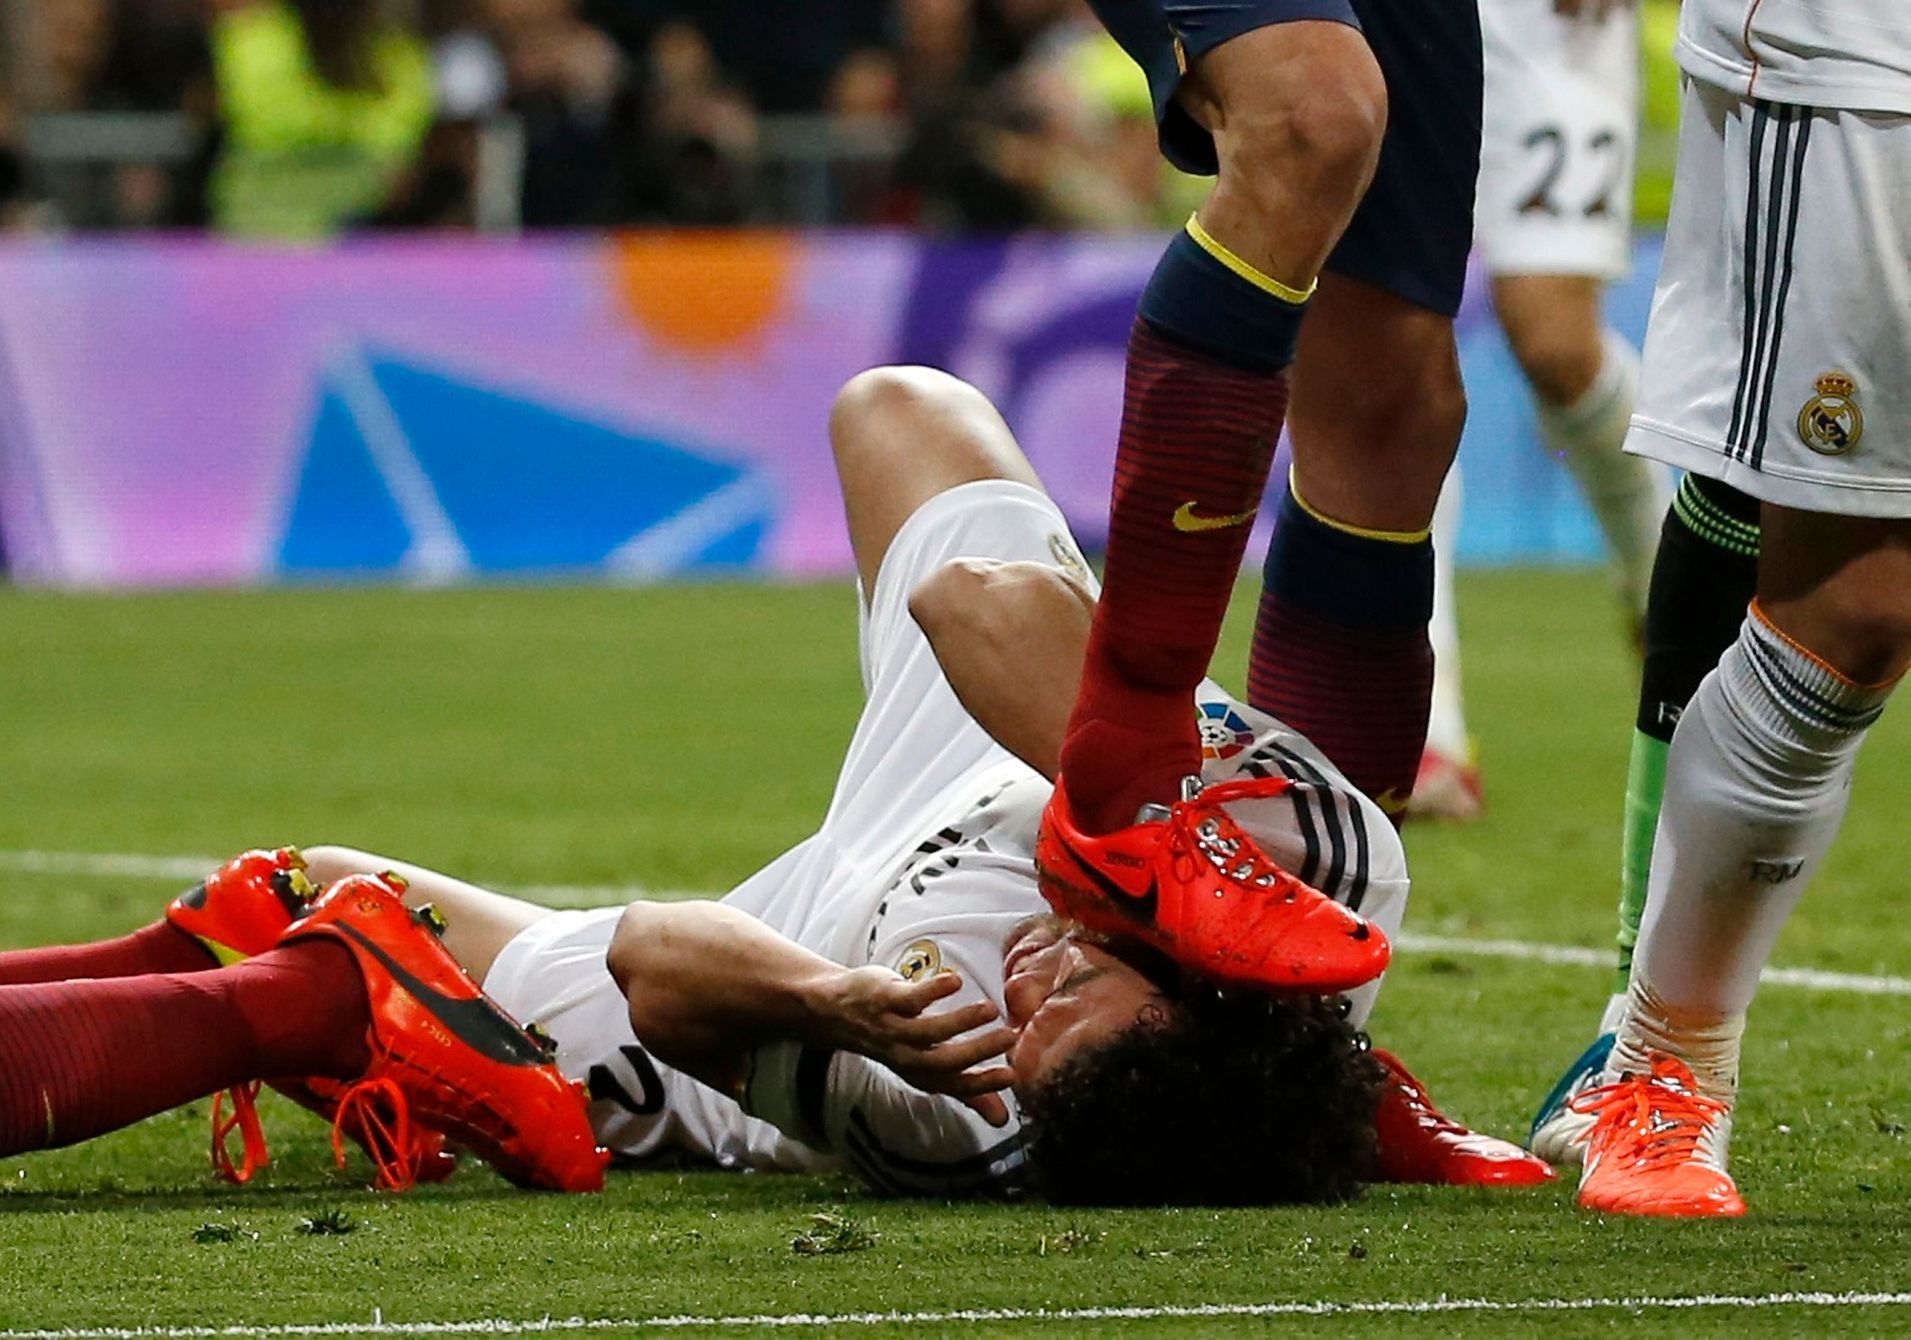 Barcelona's Busquets steps on the face of Real Madrid's Pepe during La Liga's second 'Clasico' soccer match in Madrid